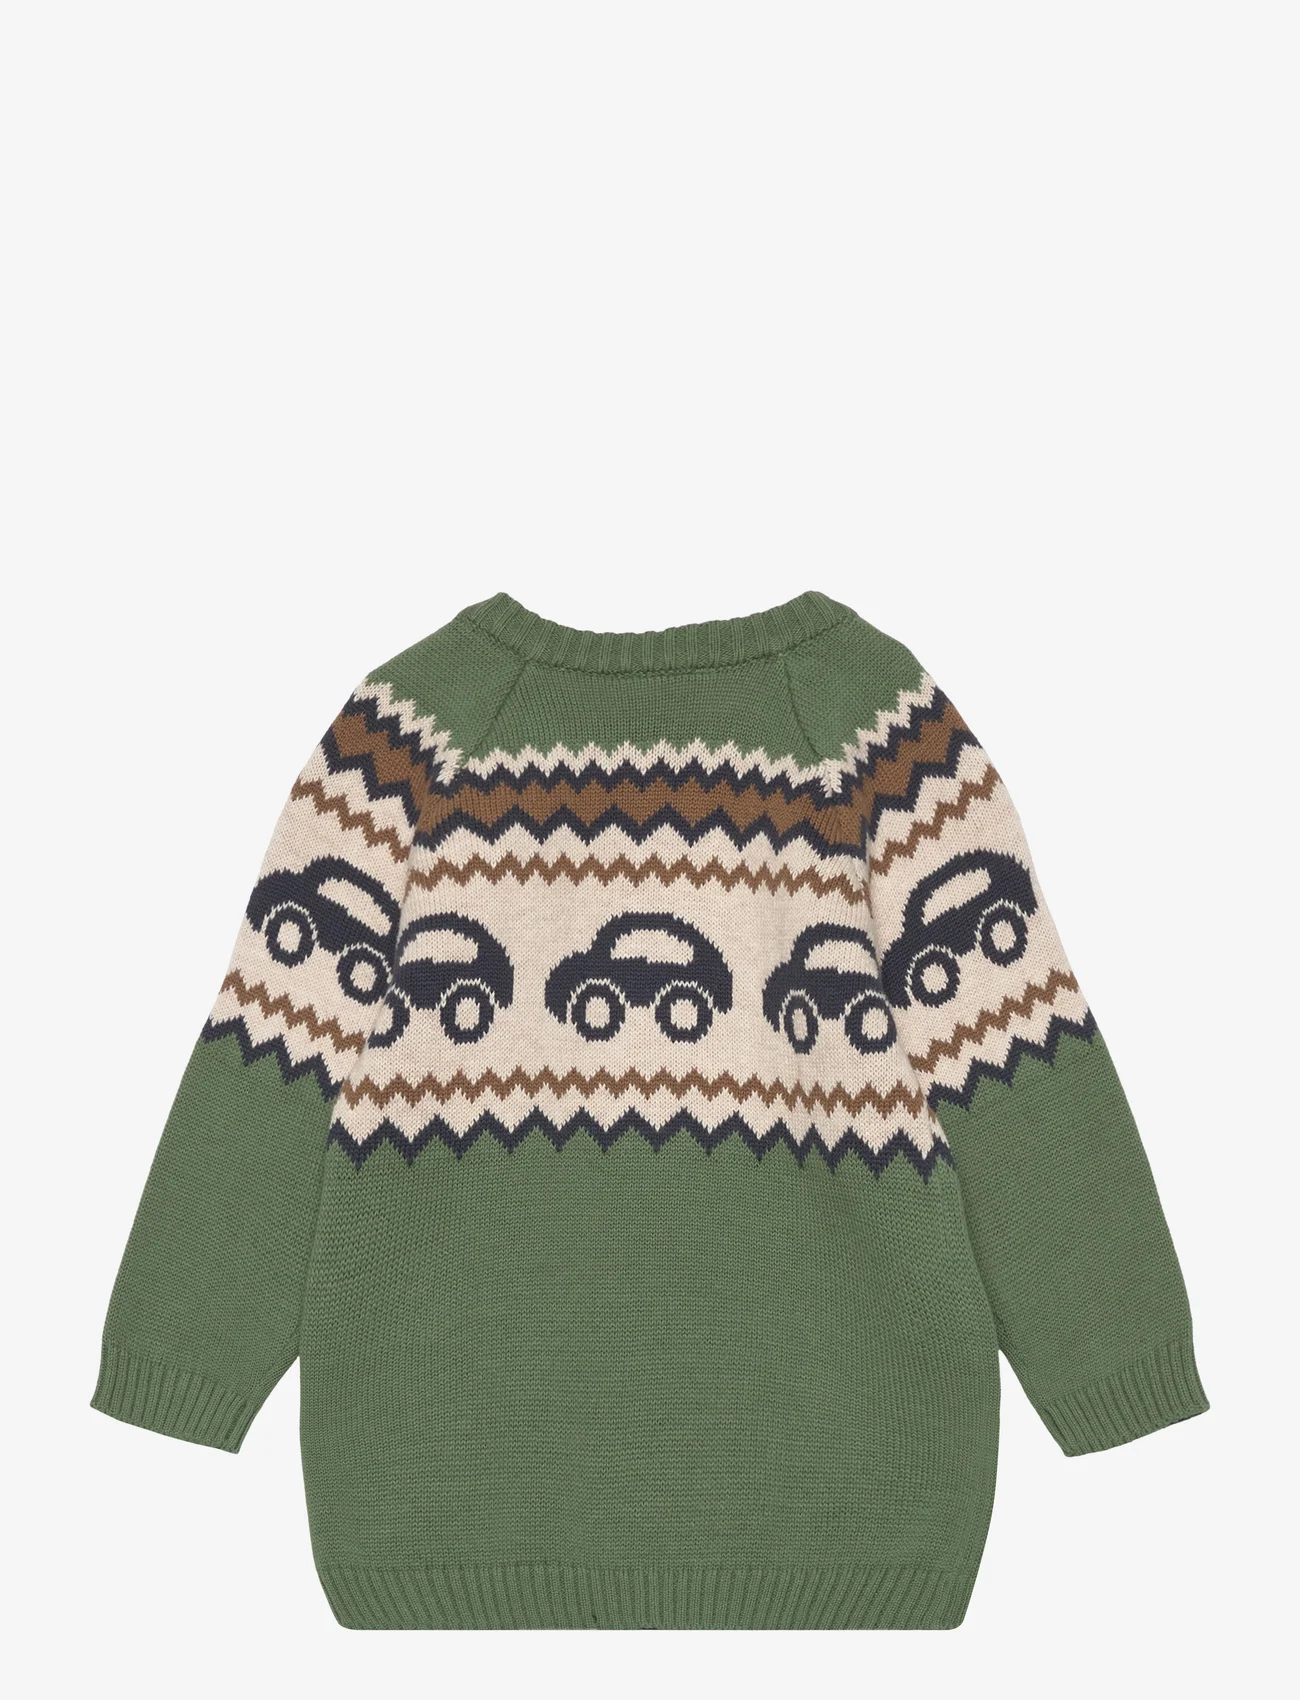 Hust & Claire - Palle - Pullover - gensere - elm green - 1